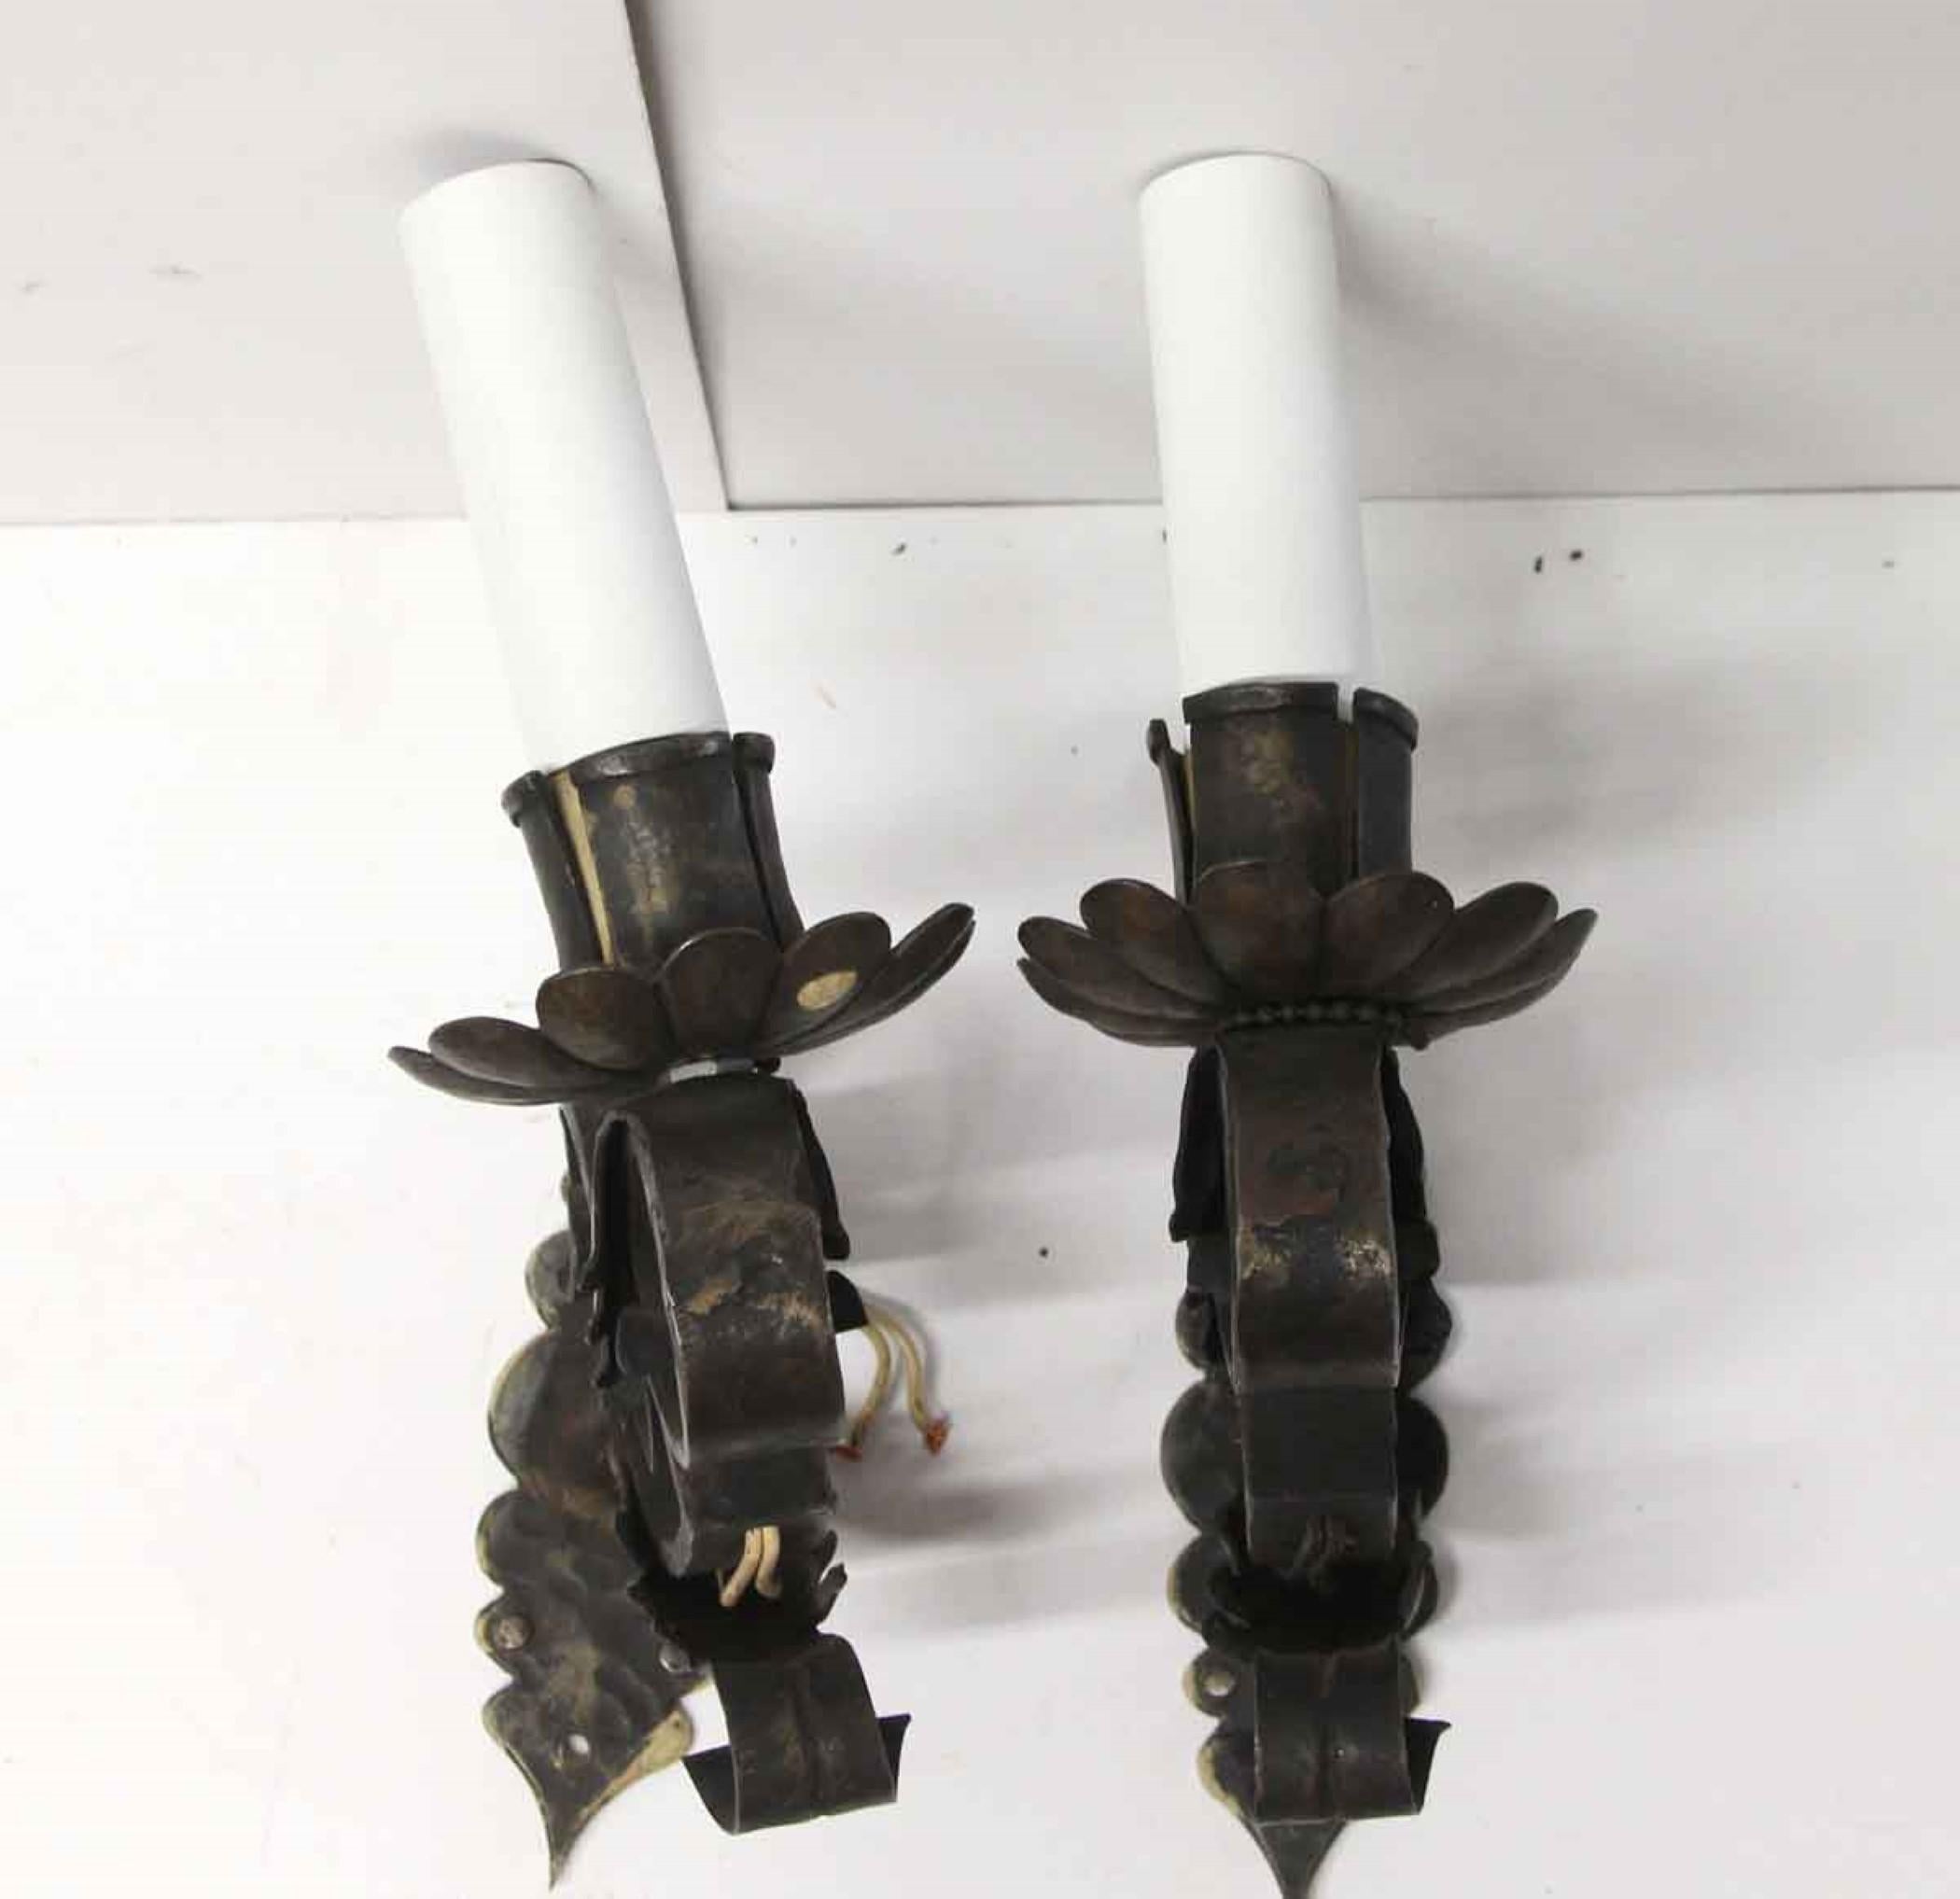 Offered is a pair of cast iron sconces from the 1920s. They are designed with a single candlestick arm, scrolls, the acanthus leaf design, and a flower cup bobeche. Priced as a pair. This can be seen at our 400 Gilligan St location in Scranton, PA.